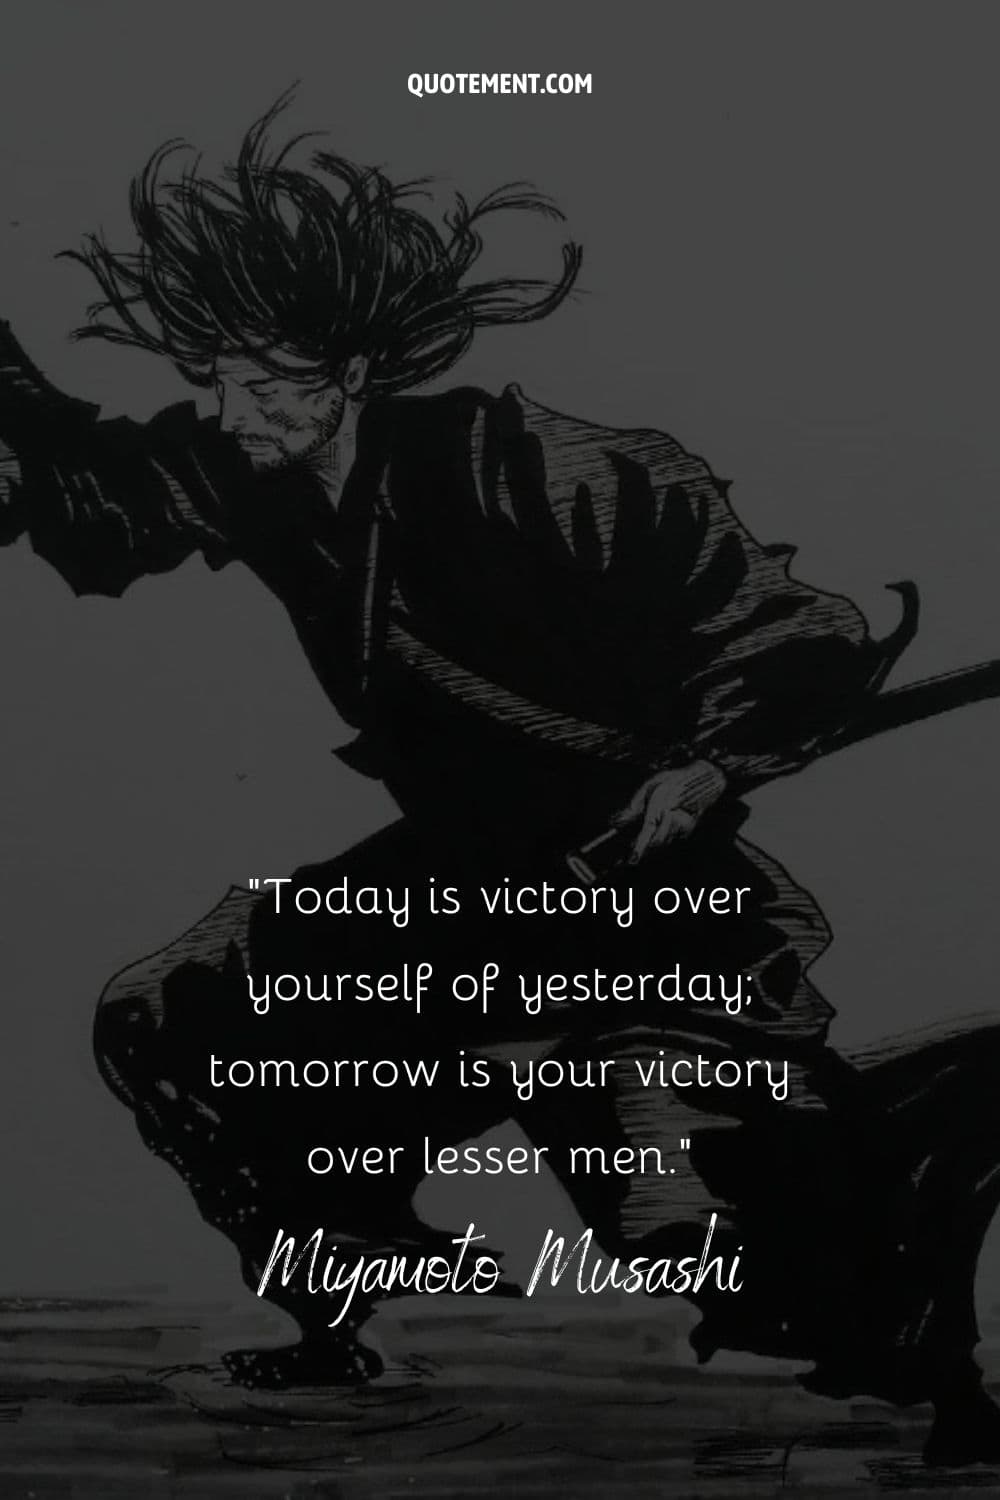 martial arts fighter representing the greatest Miyamoto Musashi quote